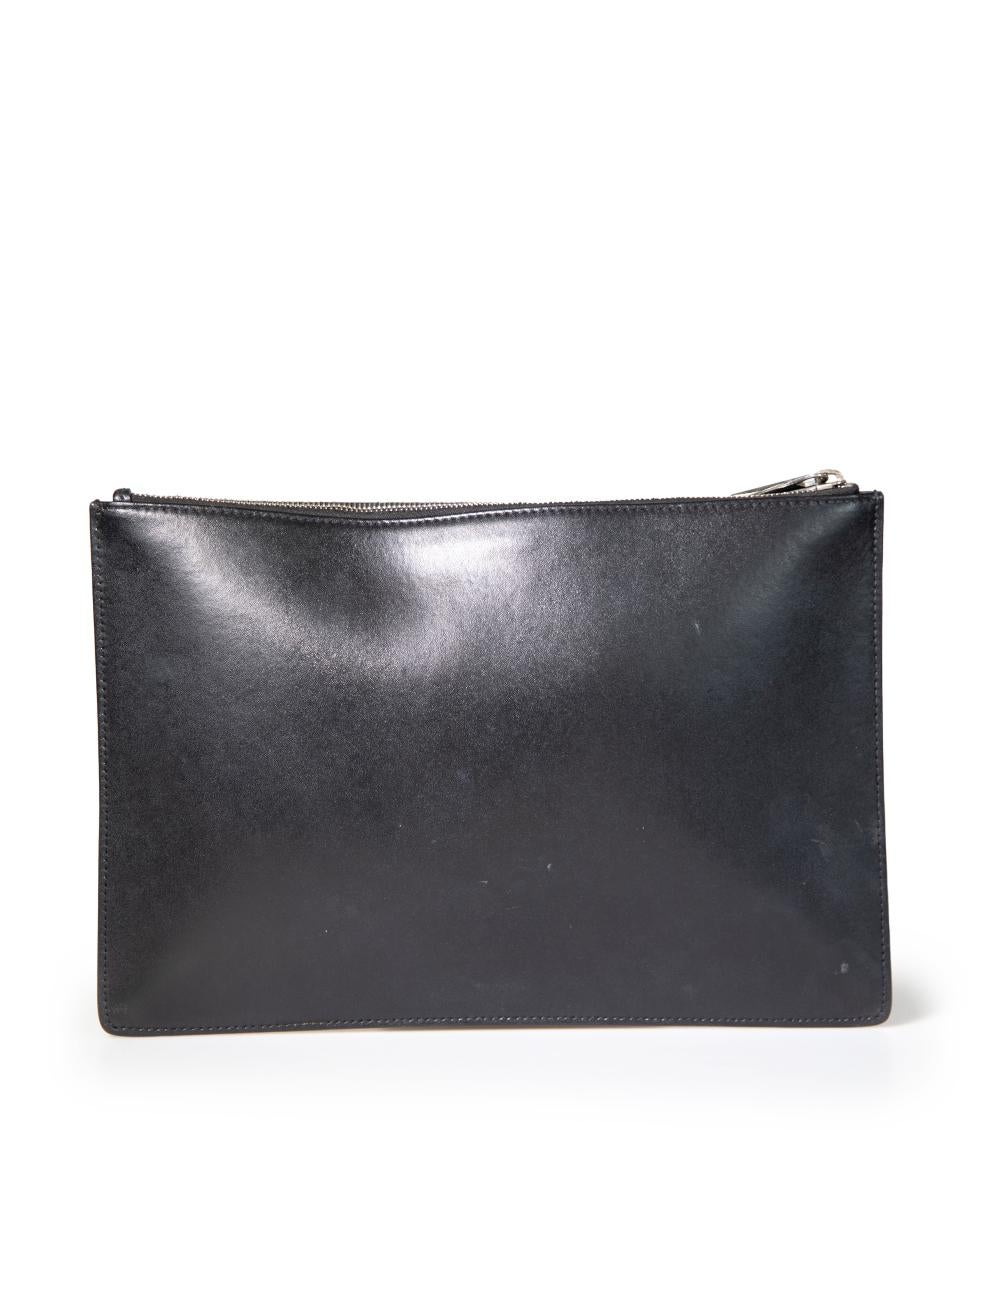 Givenchy Black Calfskin I Feel Love Clutch In Excellent Condition For Sale In London, GB